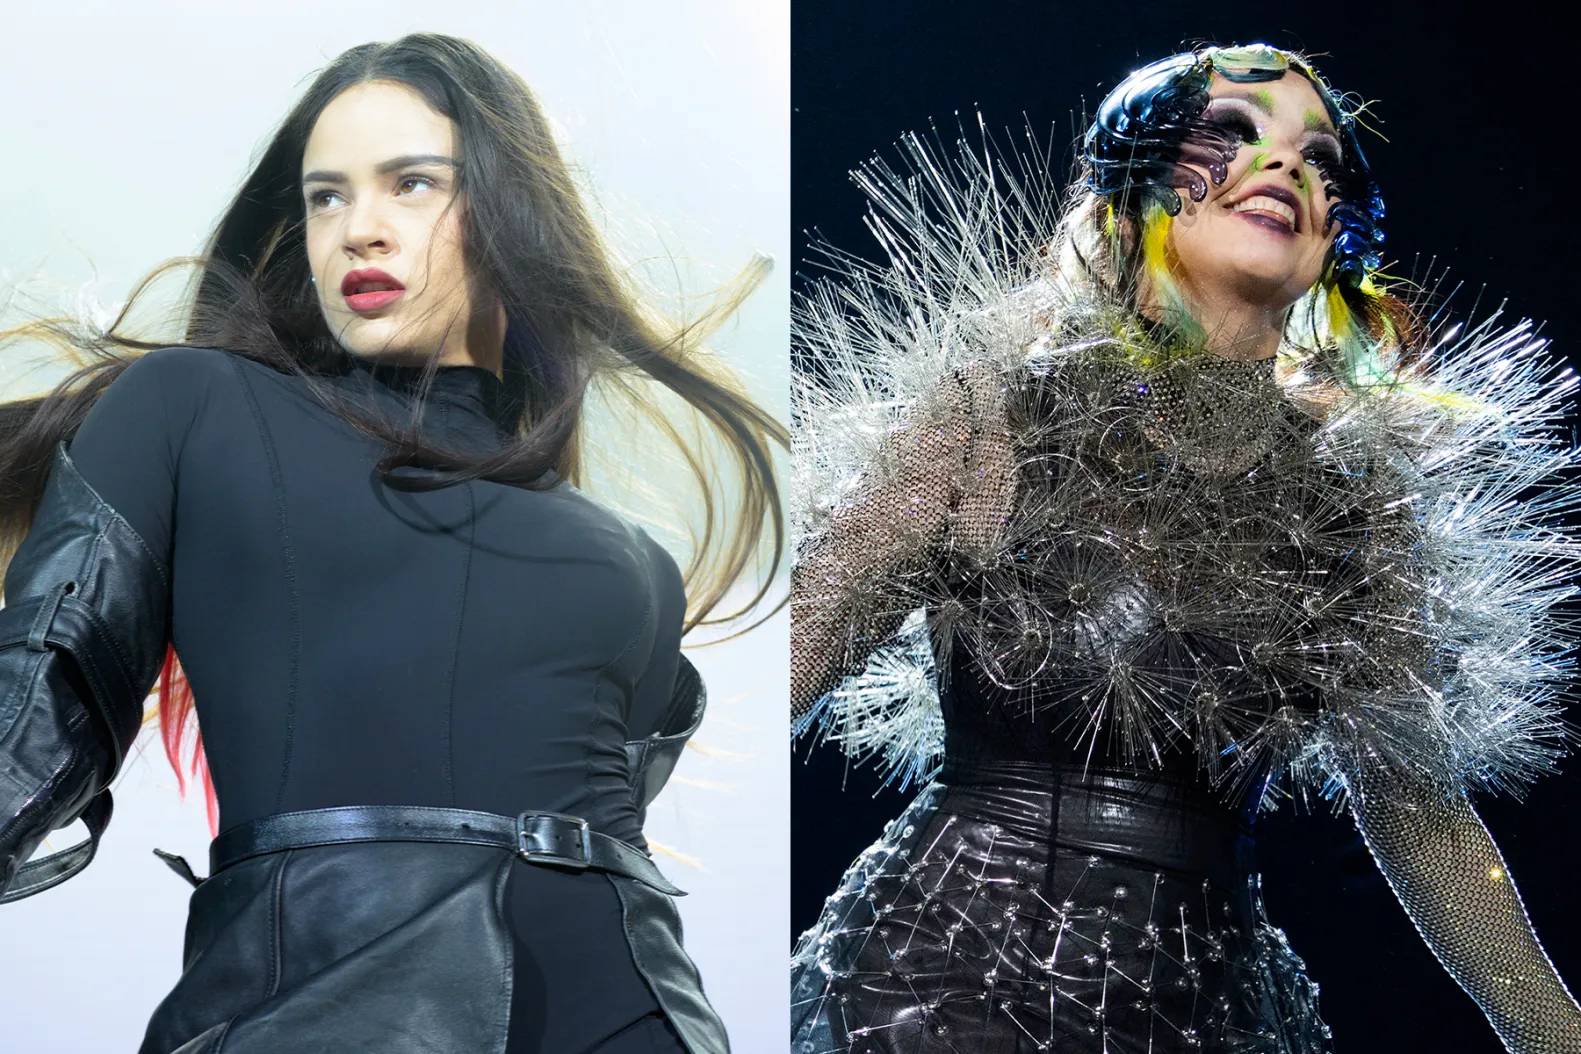 Bjork and Rosalia’s duet ‘Oral’ is a surreal dancehall-inspired pop song